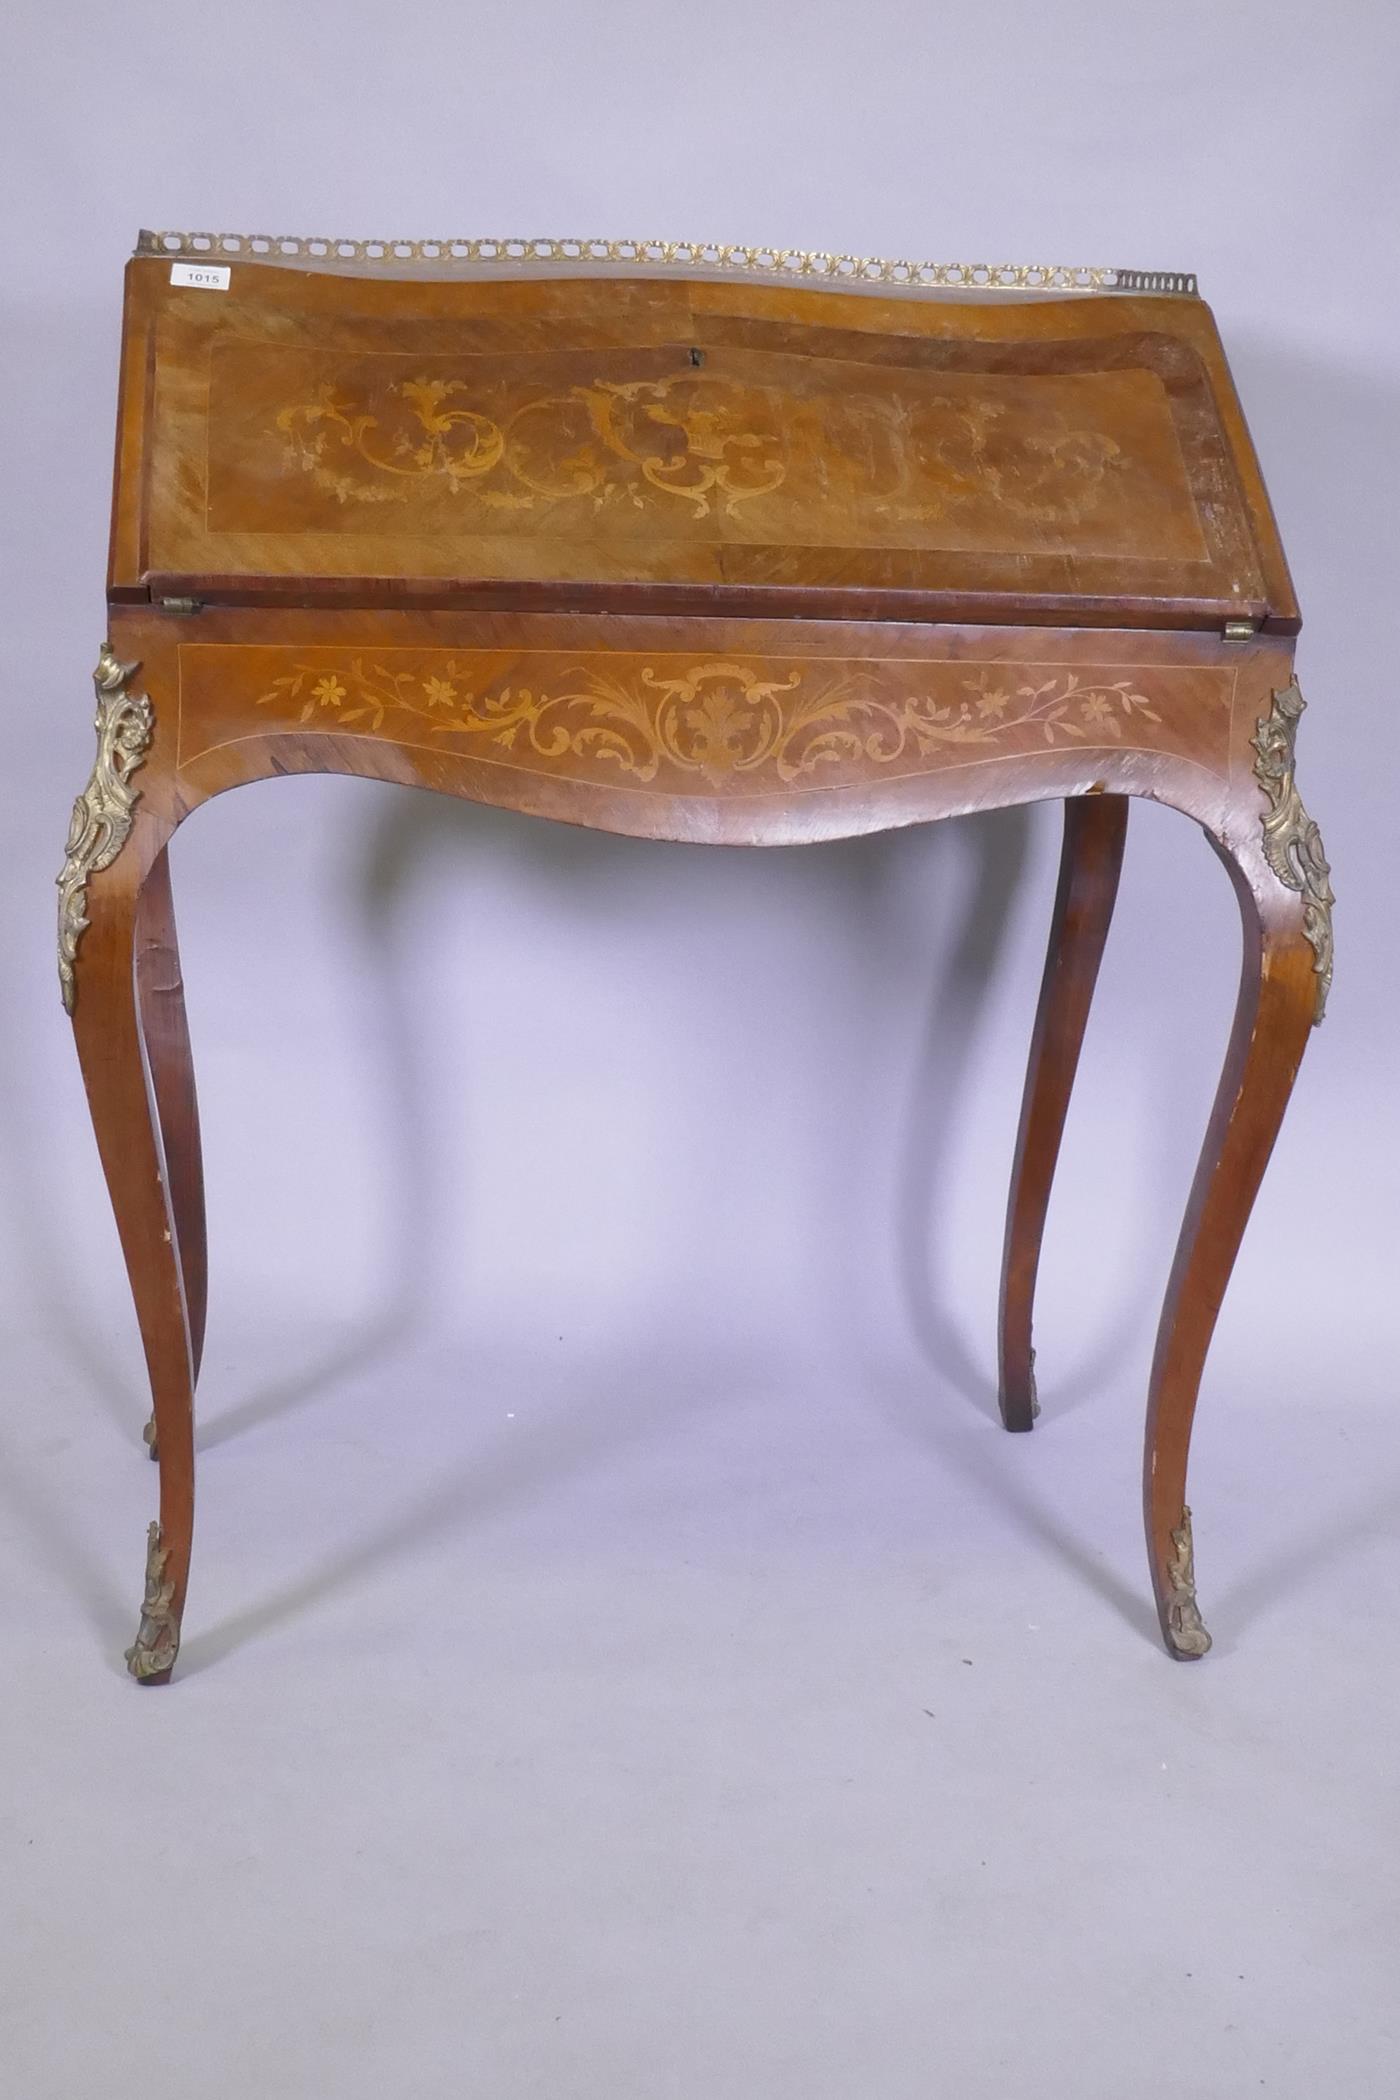 A C19th continental marquetry inlaid tulipwood and rosewood bonheure de jour, with pierced brass - Image 2 of 4